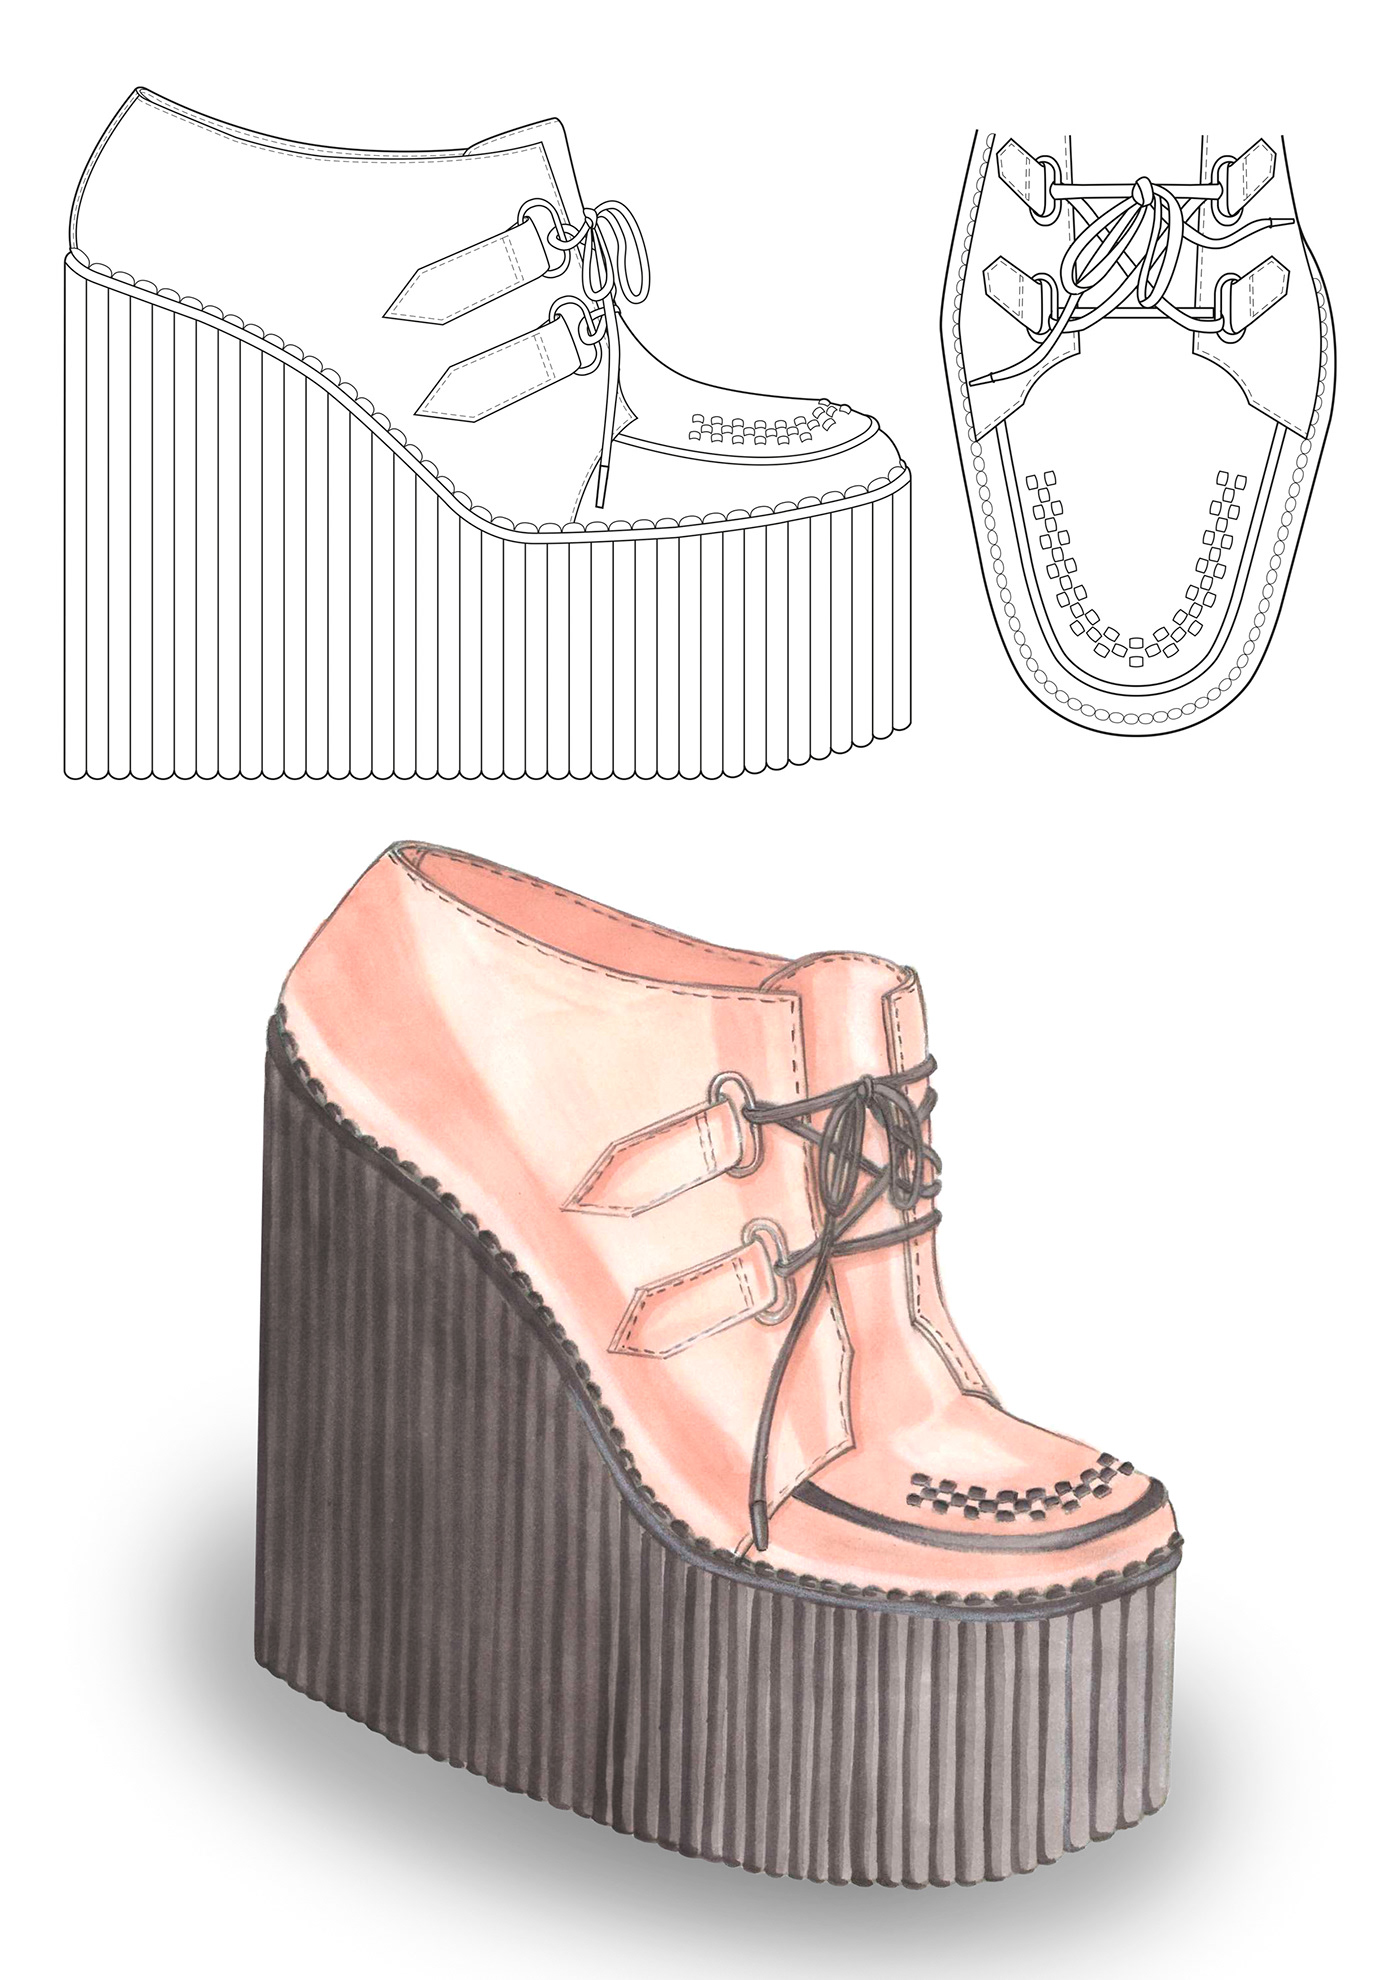 Accessory Drawing  fashiondesign fashiondesigner fashionsketch handdrawing technicaldrawing